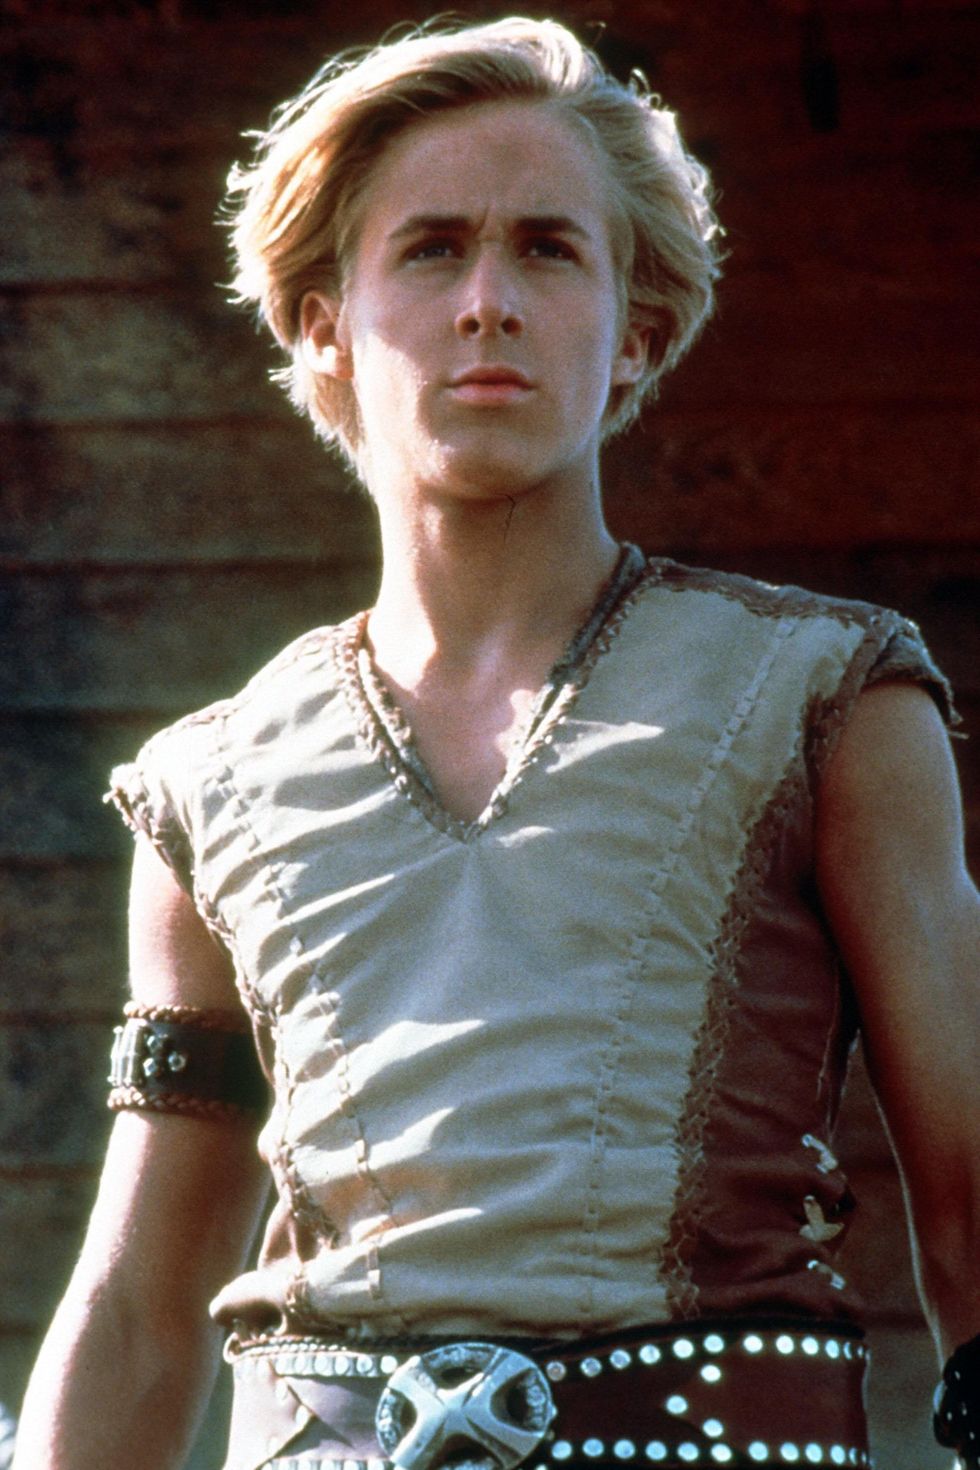 ryan gosling in character for young hercules, he wears a sleeveless tan top with an armband and a black belt